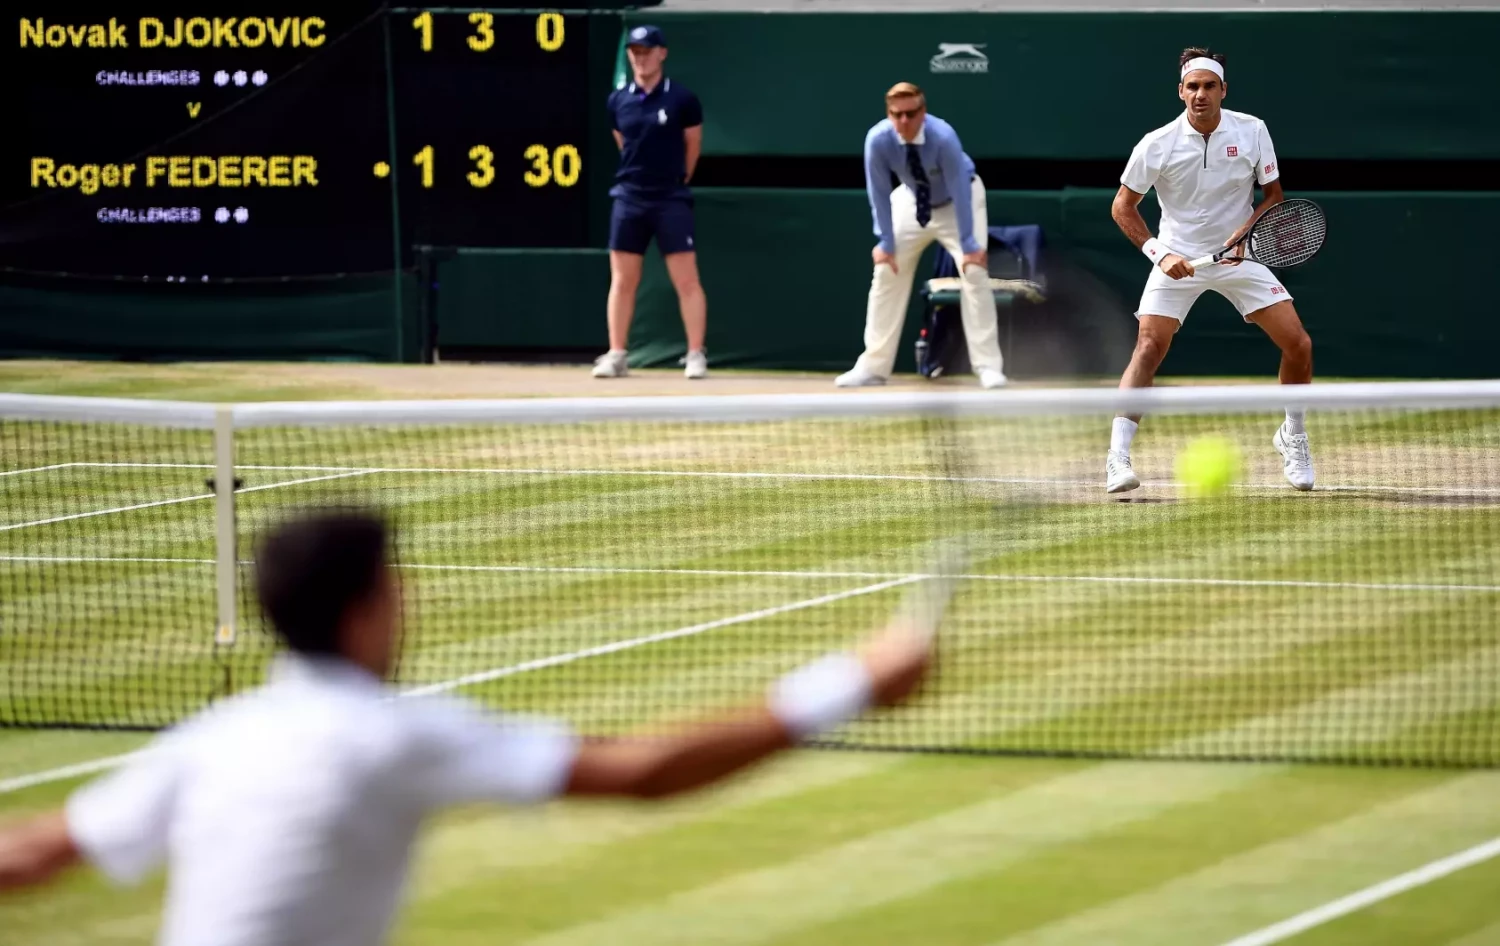 Wimbledon 2022: Why are there new tie-break rules in final sets